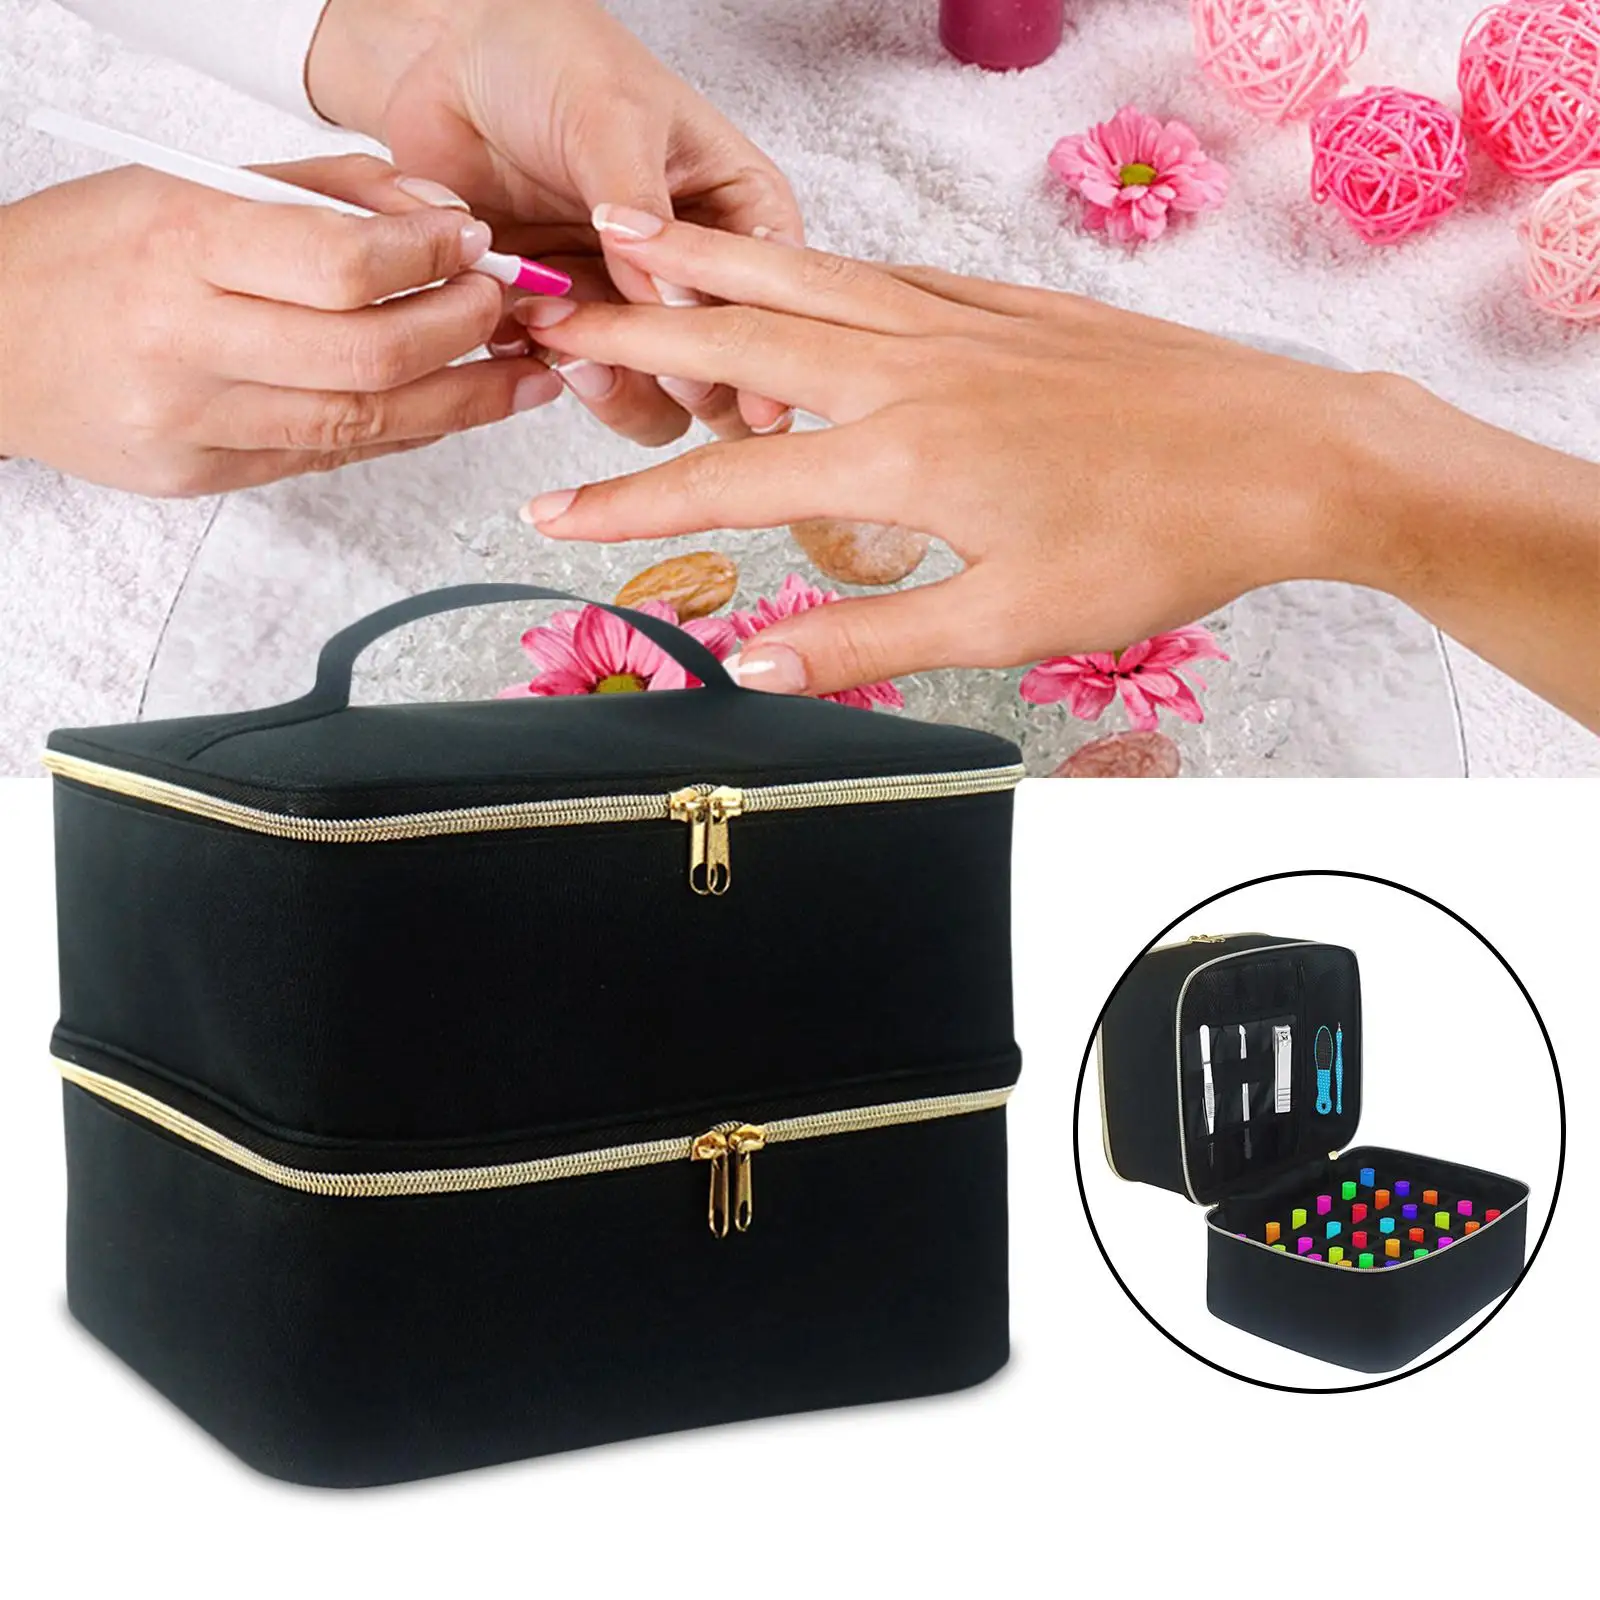 Double Layers Nail Polish Carrying Case Detachable Portable Nail Polish Storage Travel Makeup Bag for Holds 30 Bottles(15ml)